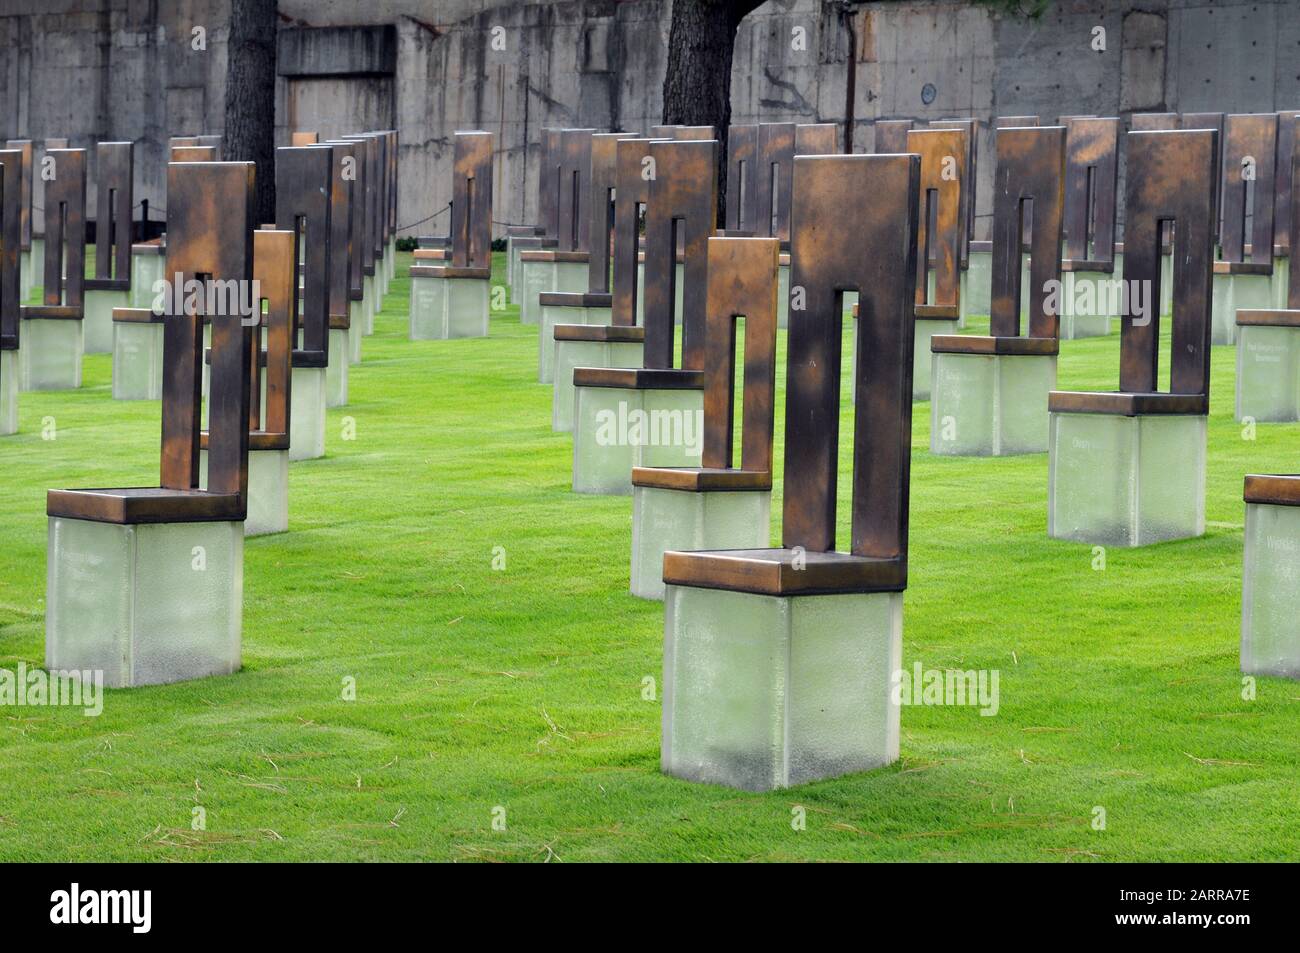 The Field of Empty Chairs at the Oklahoma City National Memorial, site of the April 19, 1995 bombing. Each chair represents one of the 168 victims. Stock Photo